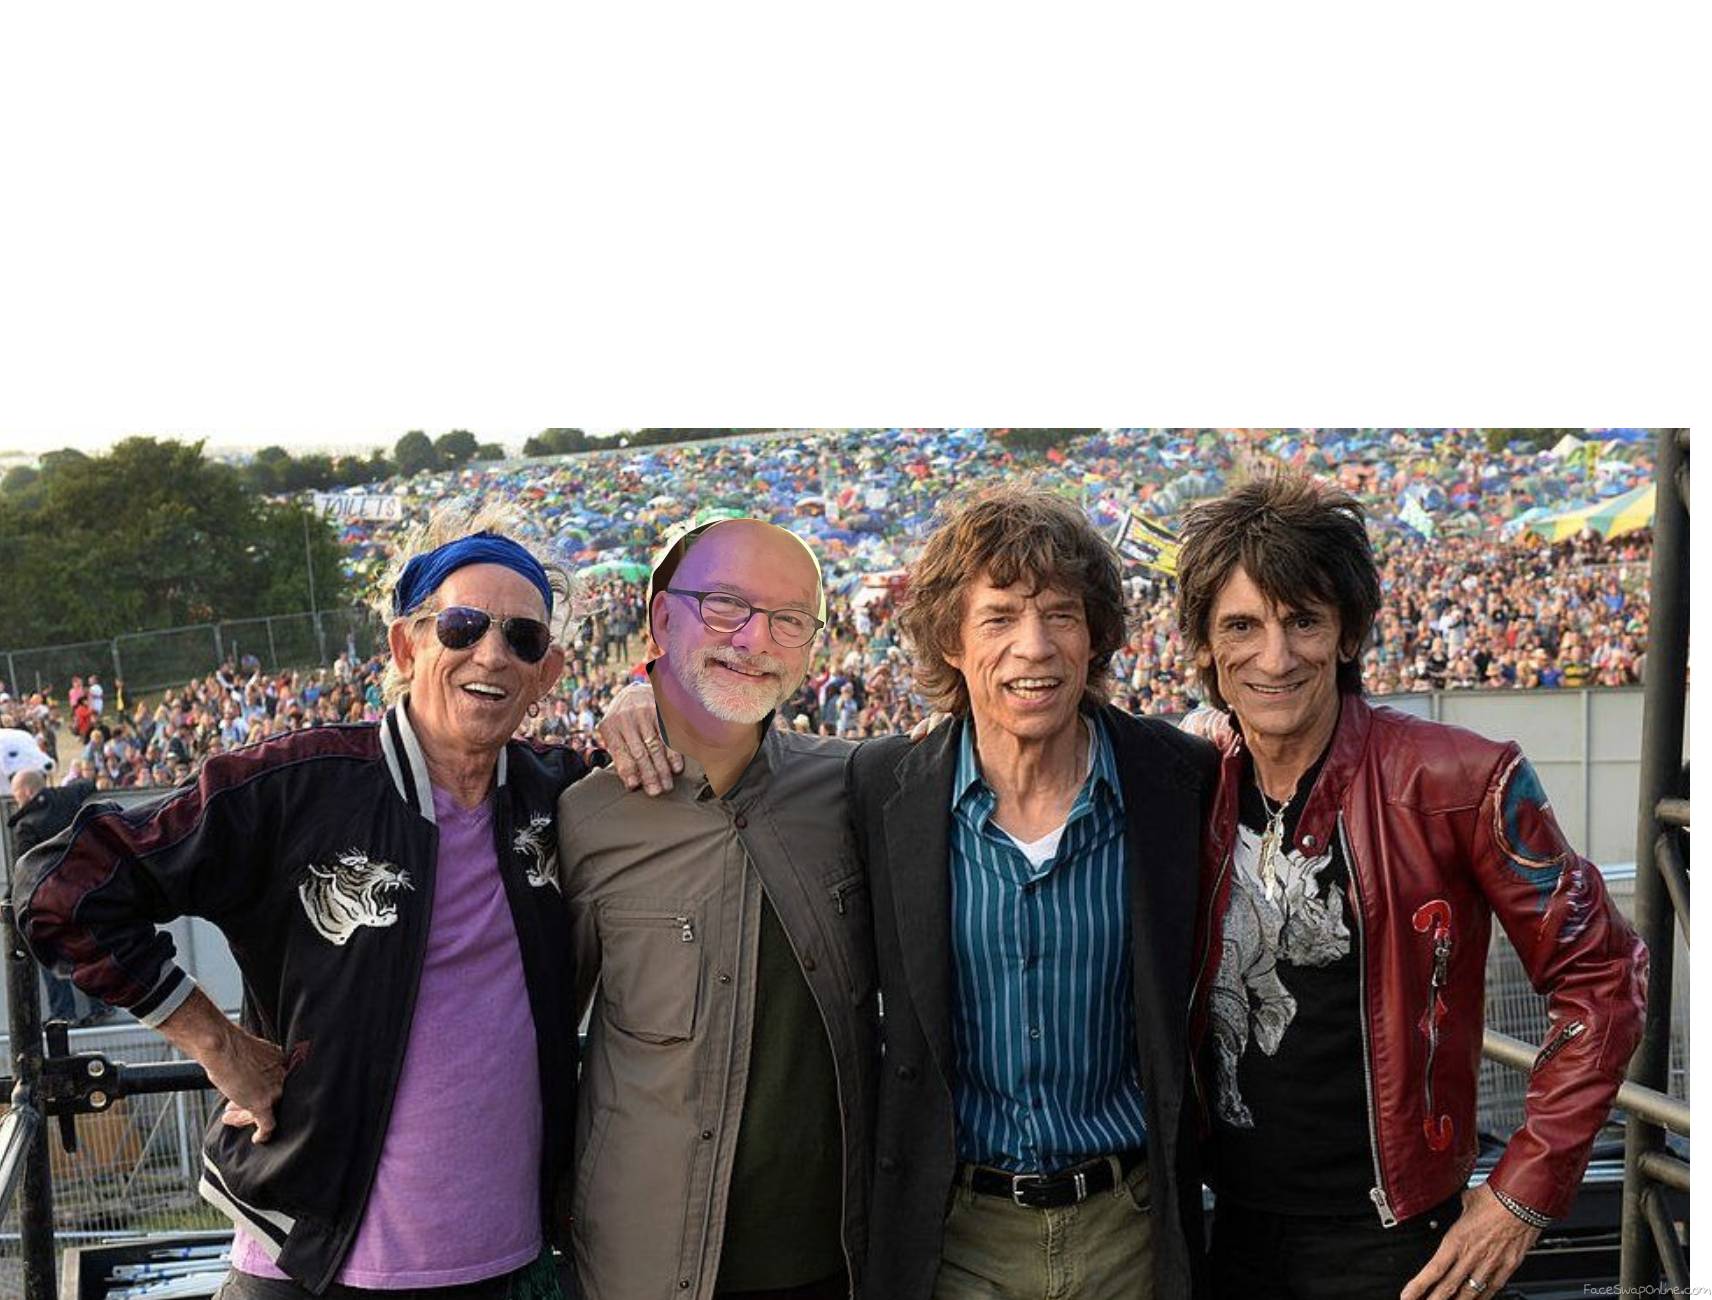 Joining the Stones on tour